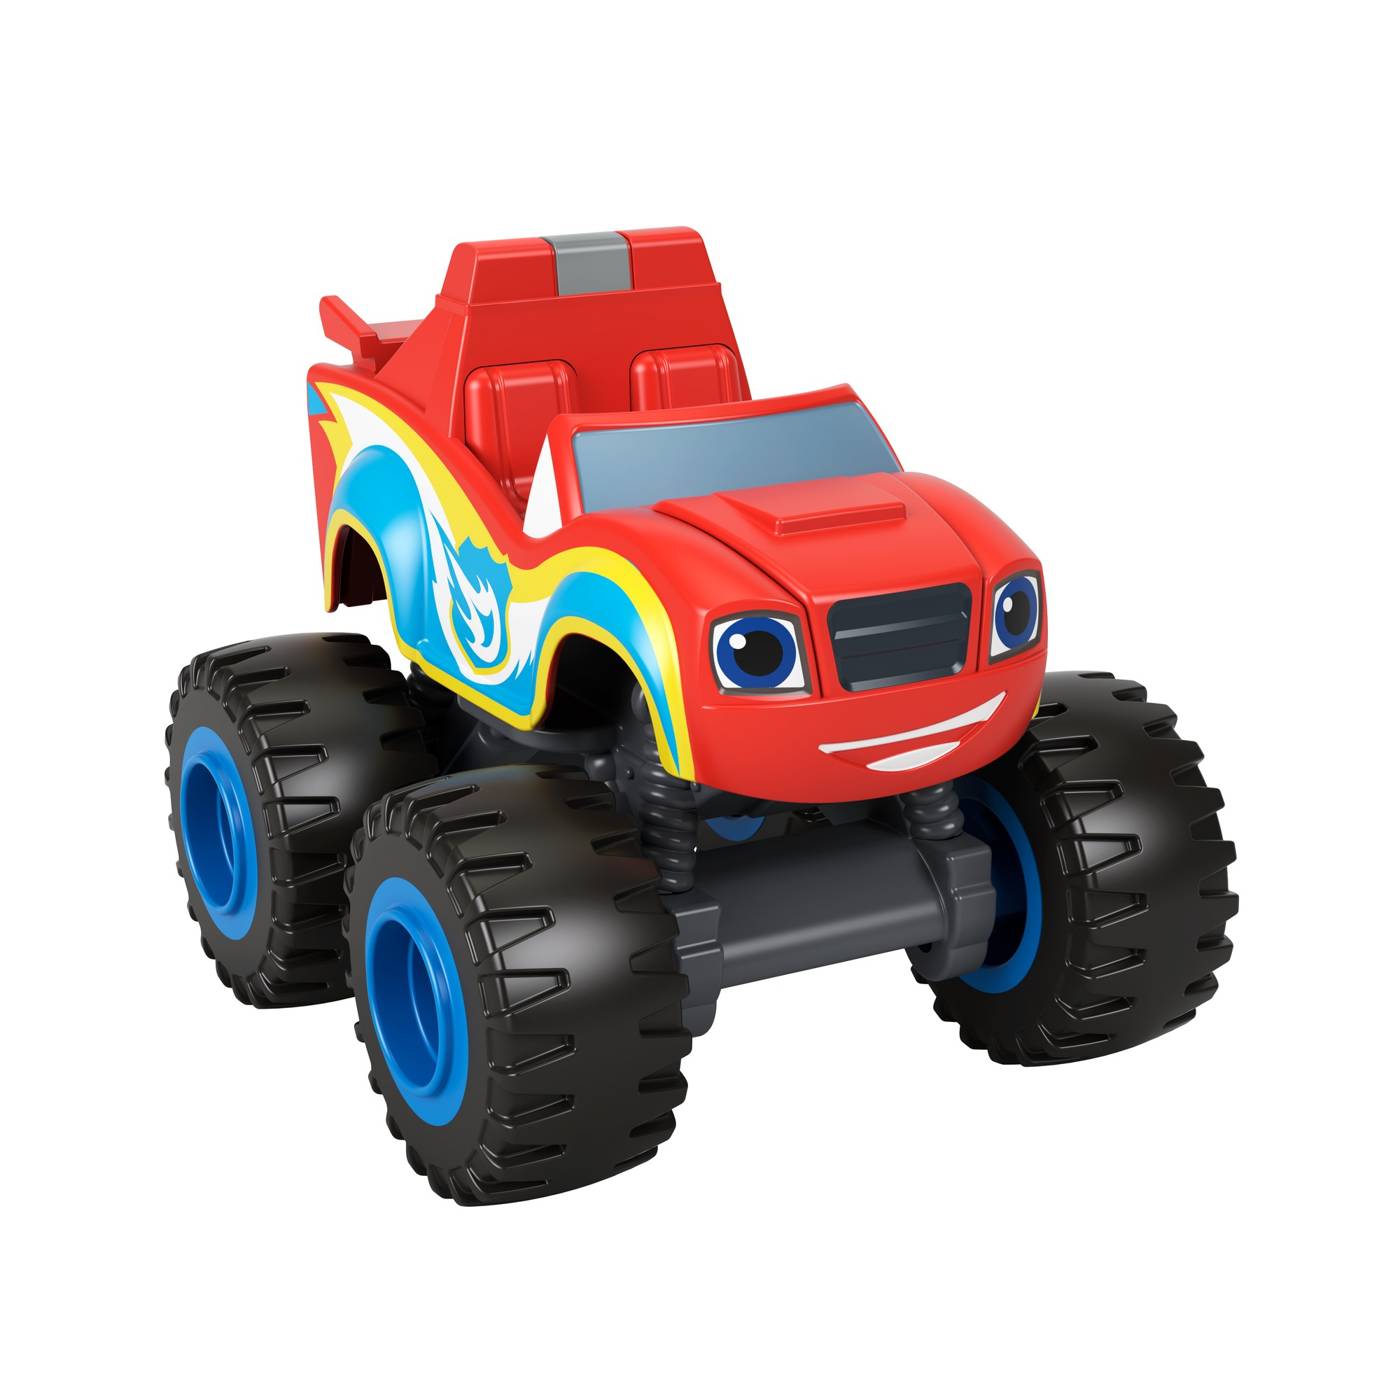 Blaze and the Monster Machines Rescue Blaze – GOODIES FOR KIDDIES